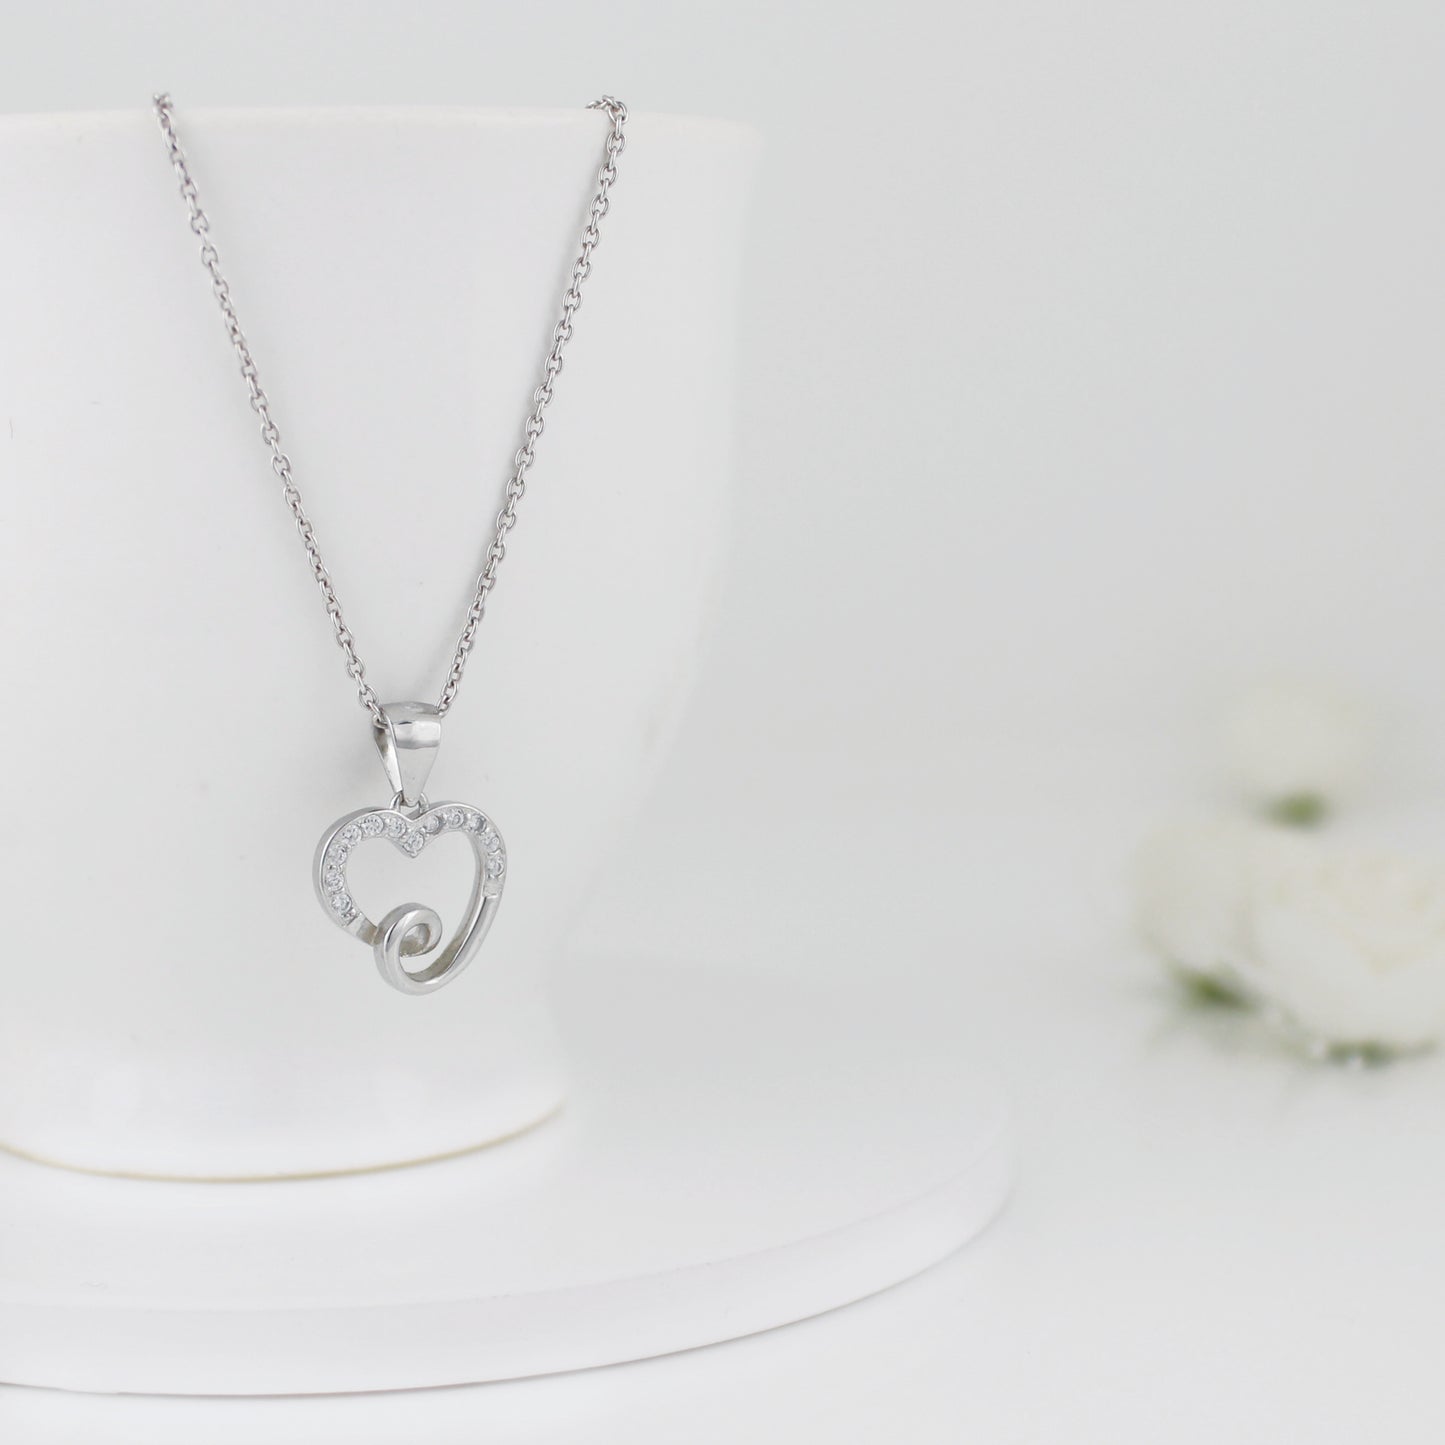 Priyanka's Loop Heart Necklace with  Link Chain